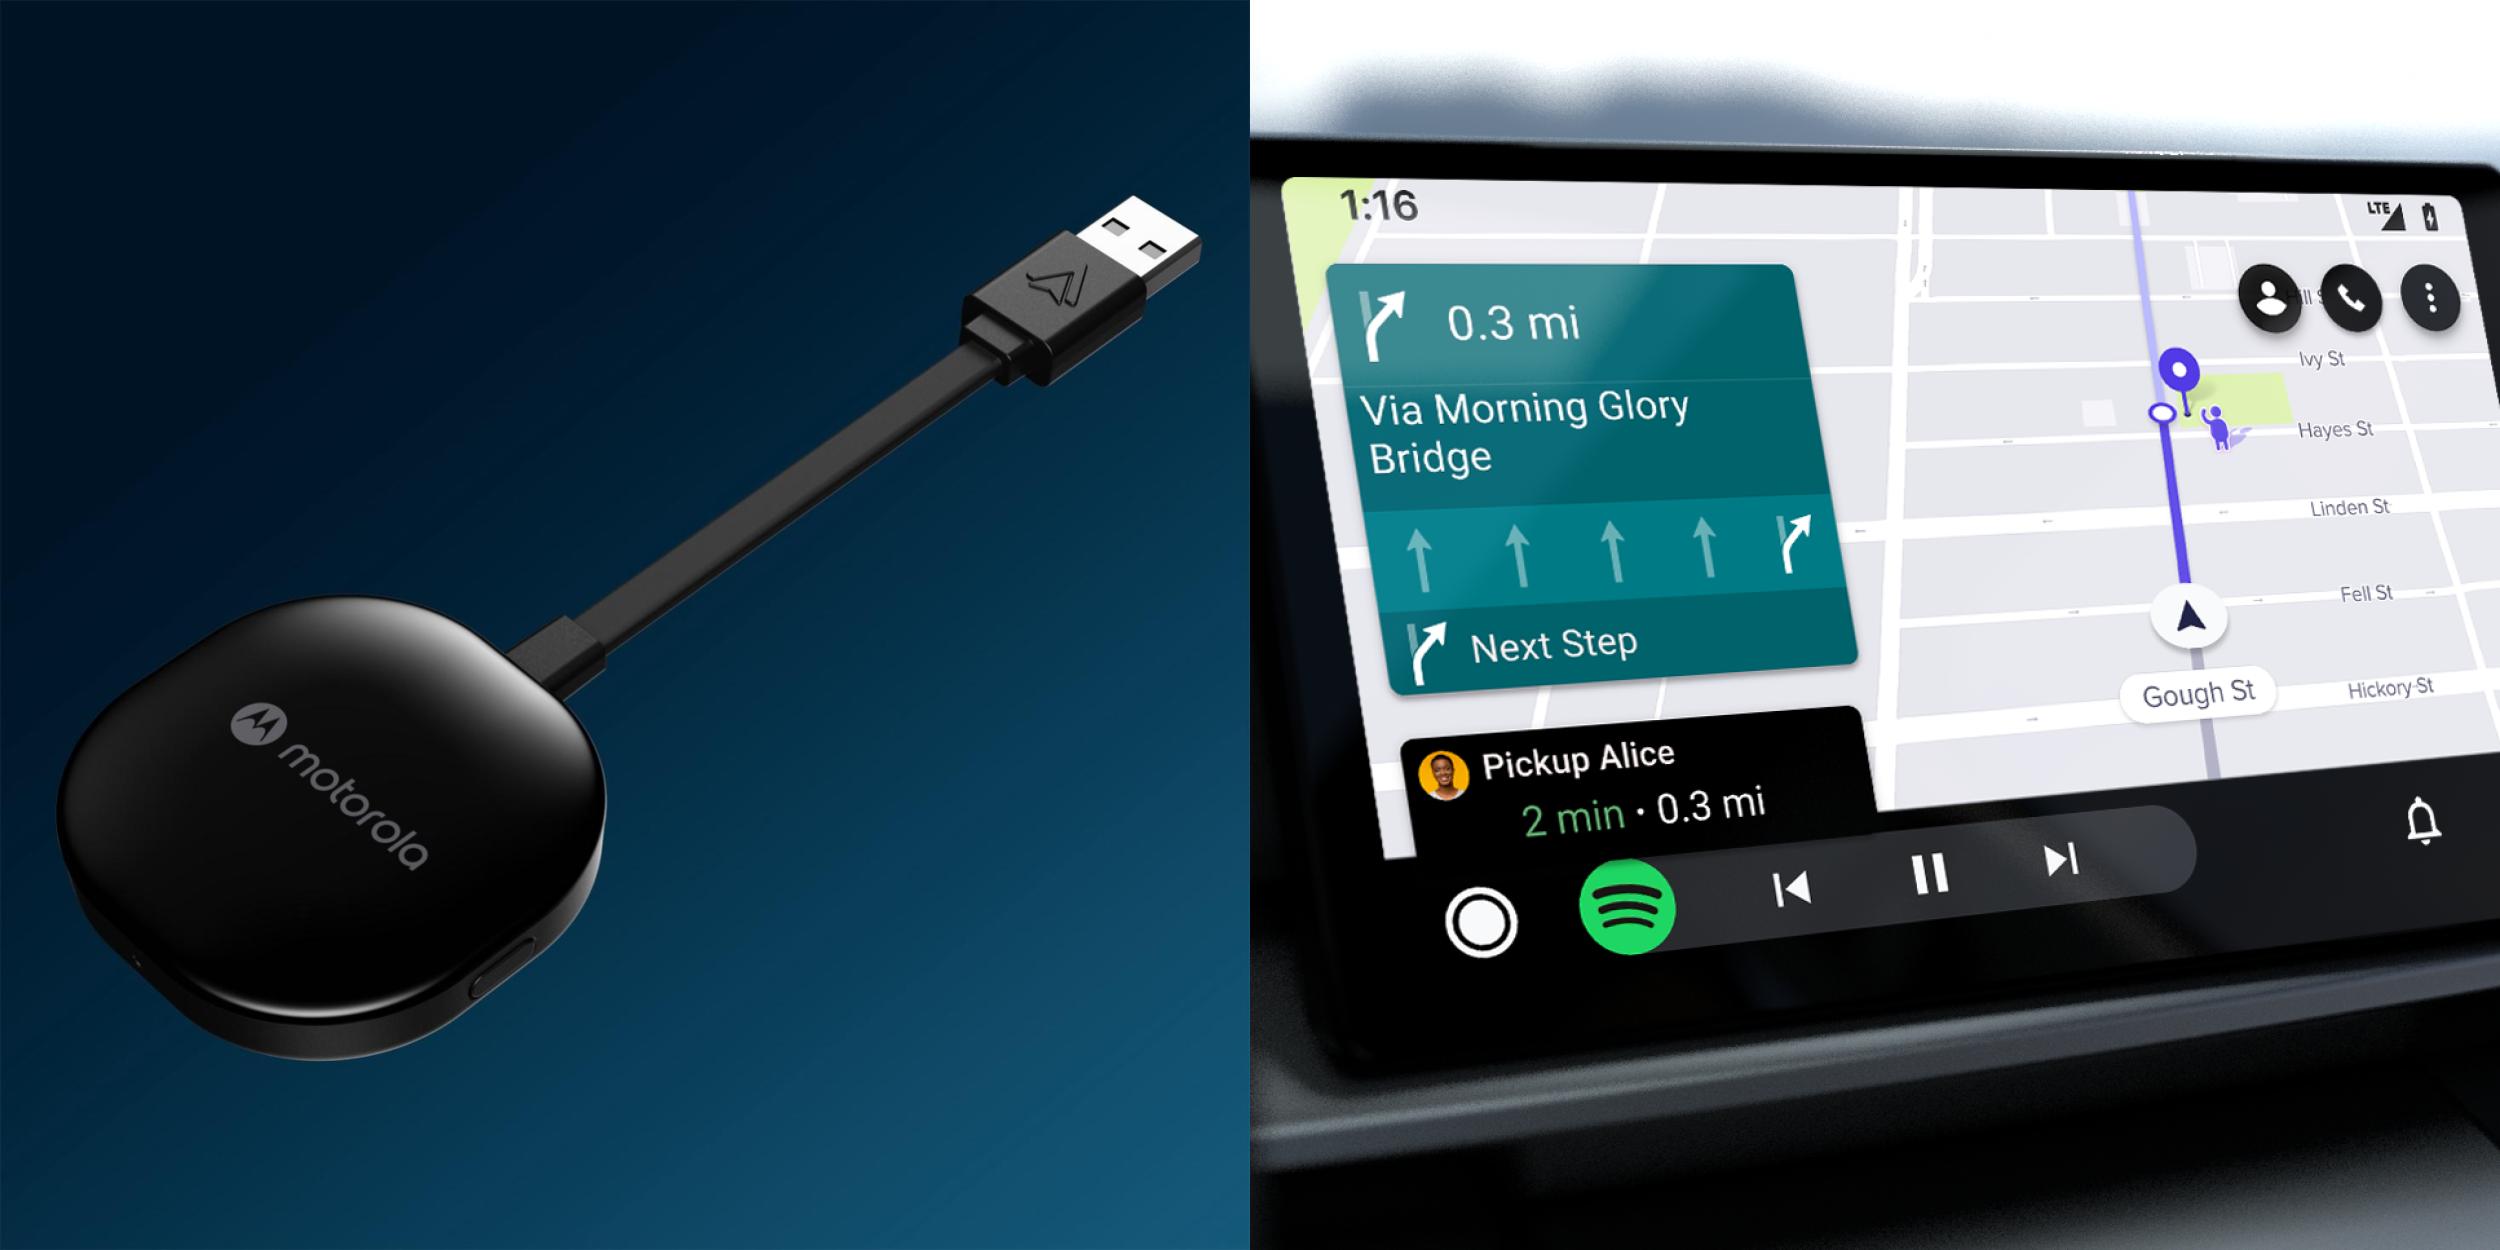 Motorola MA1 adapter brings wireless Android Auto to all cars